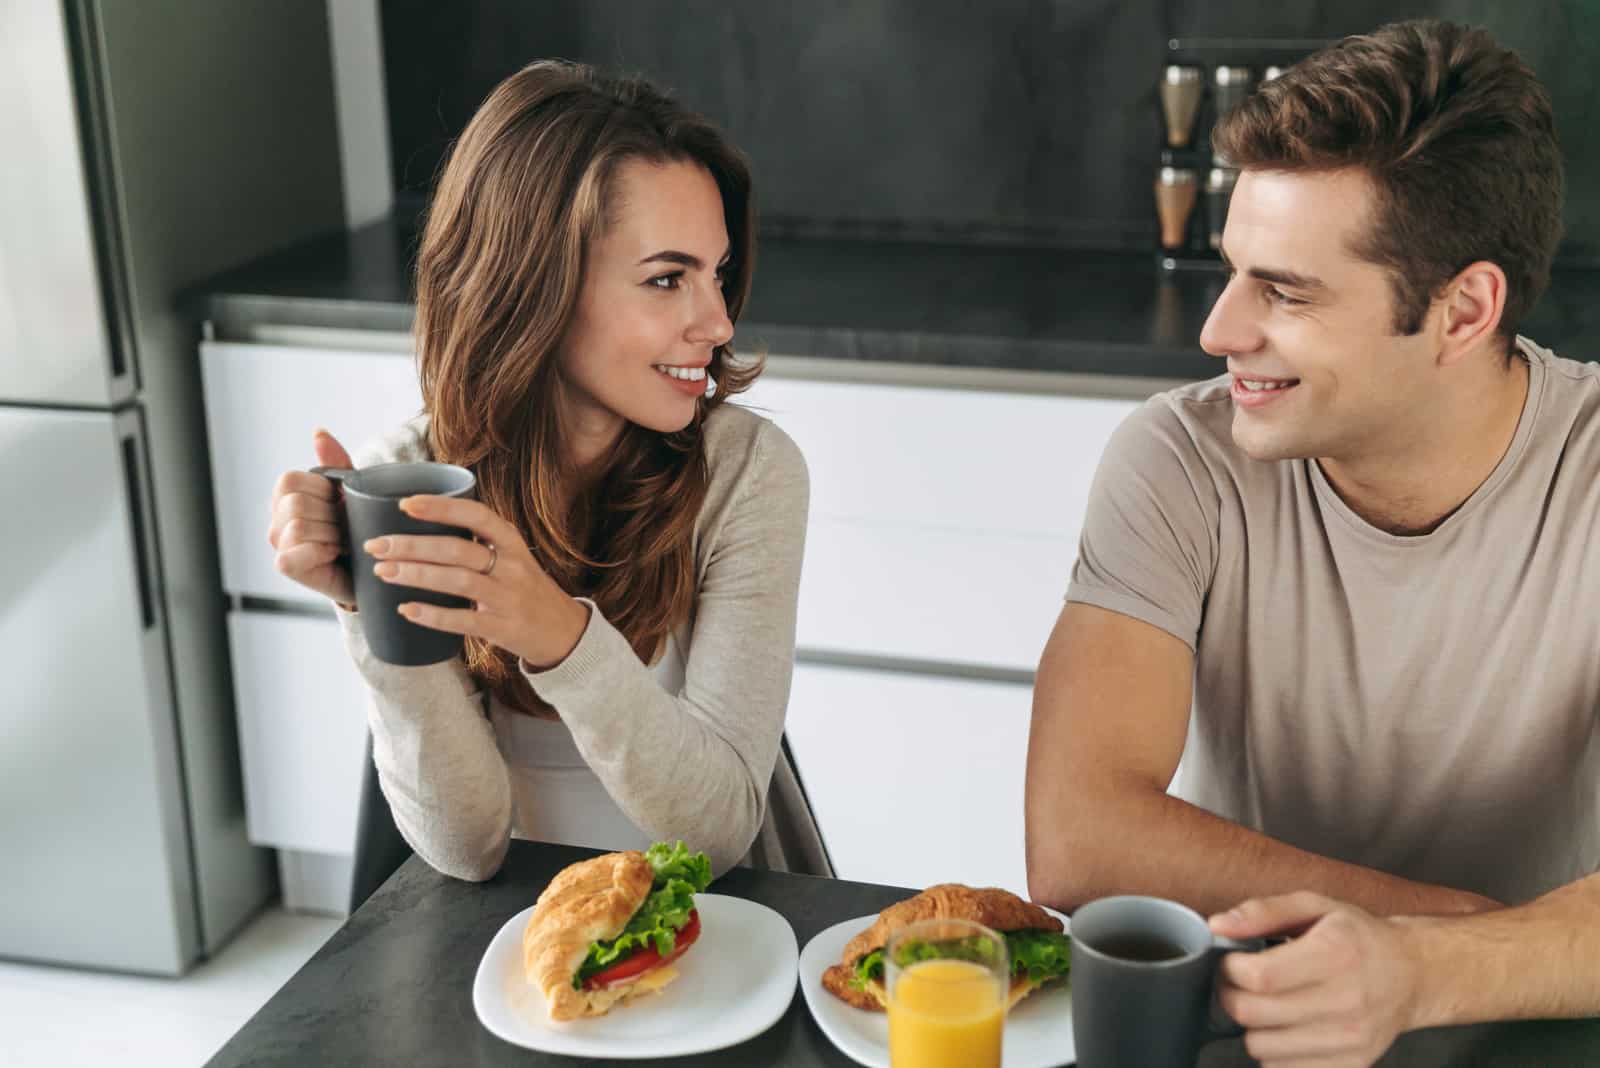 a smiling man and woman sitting next to breakfast talking